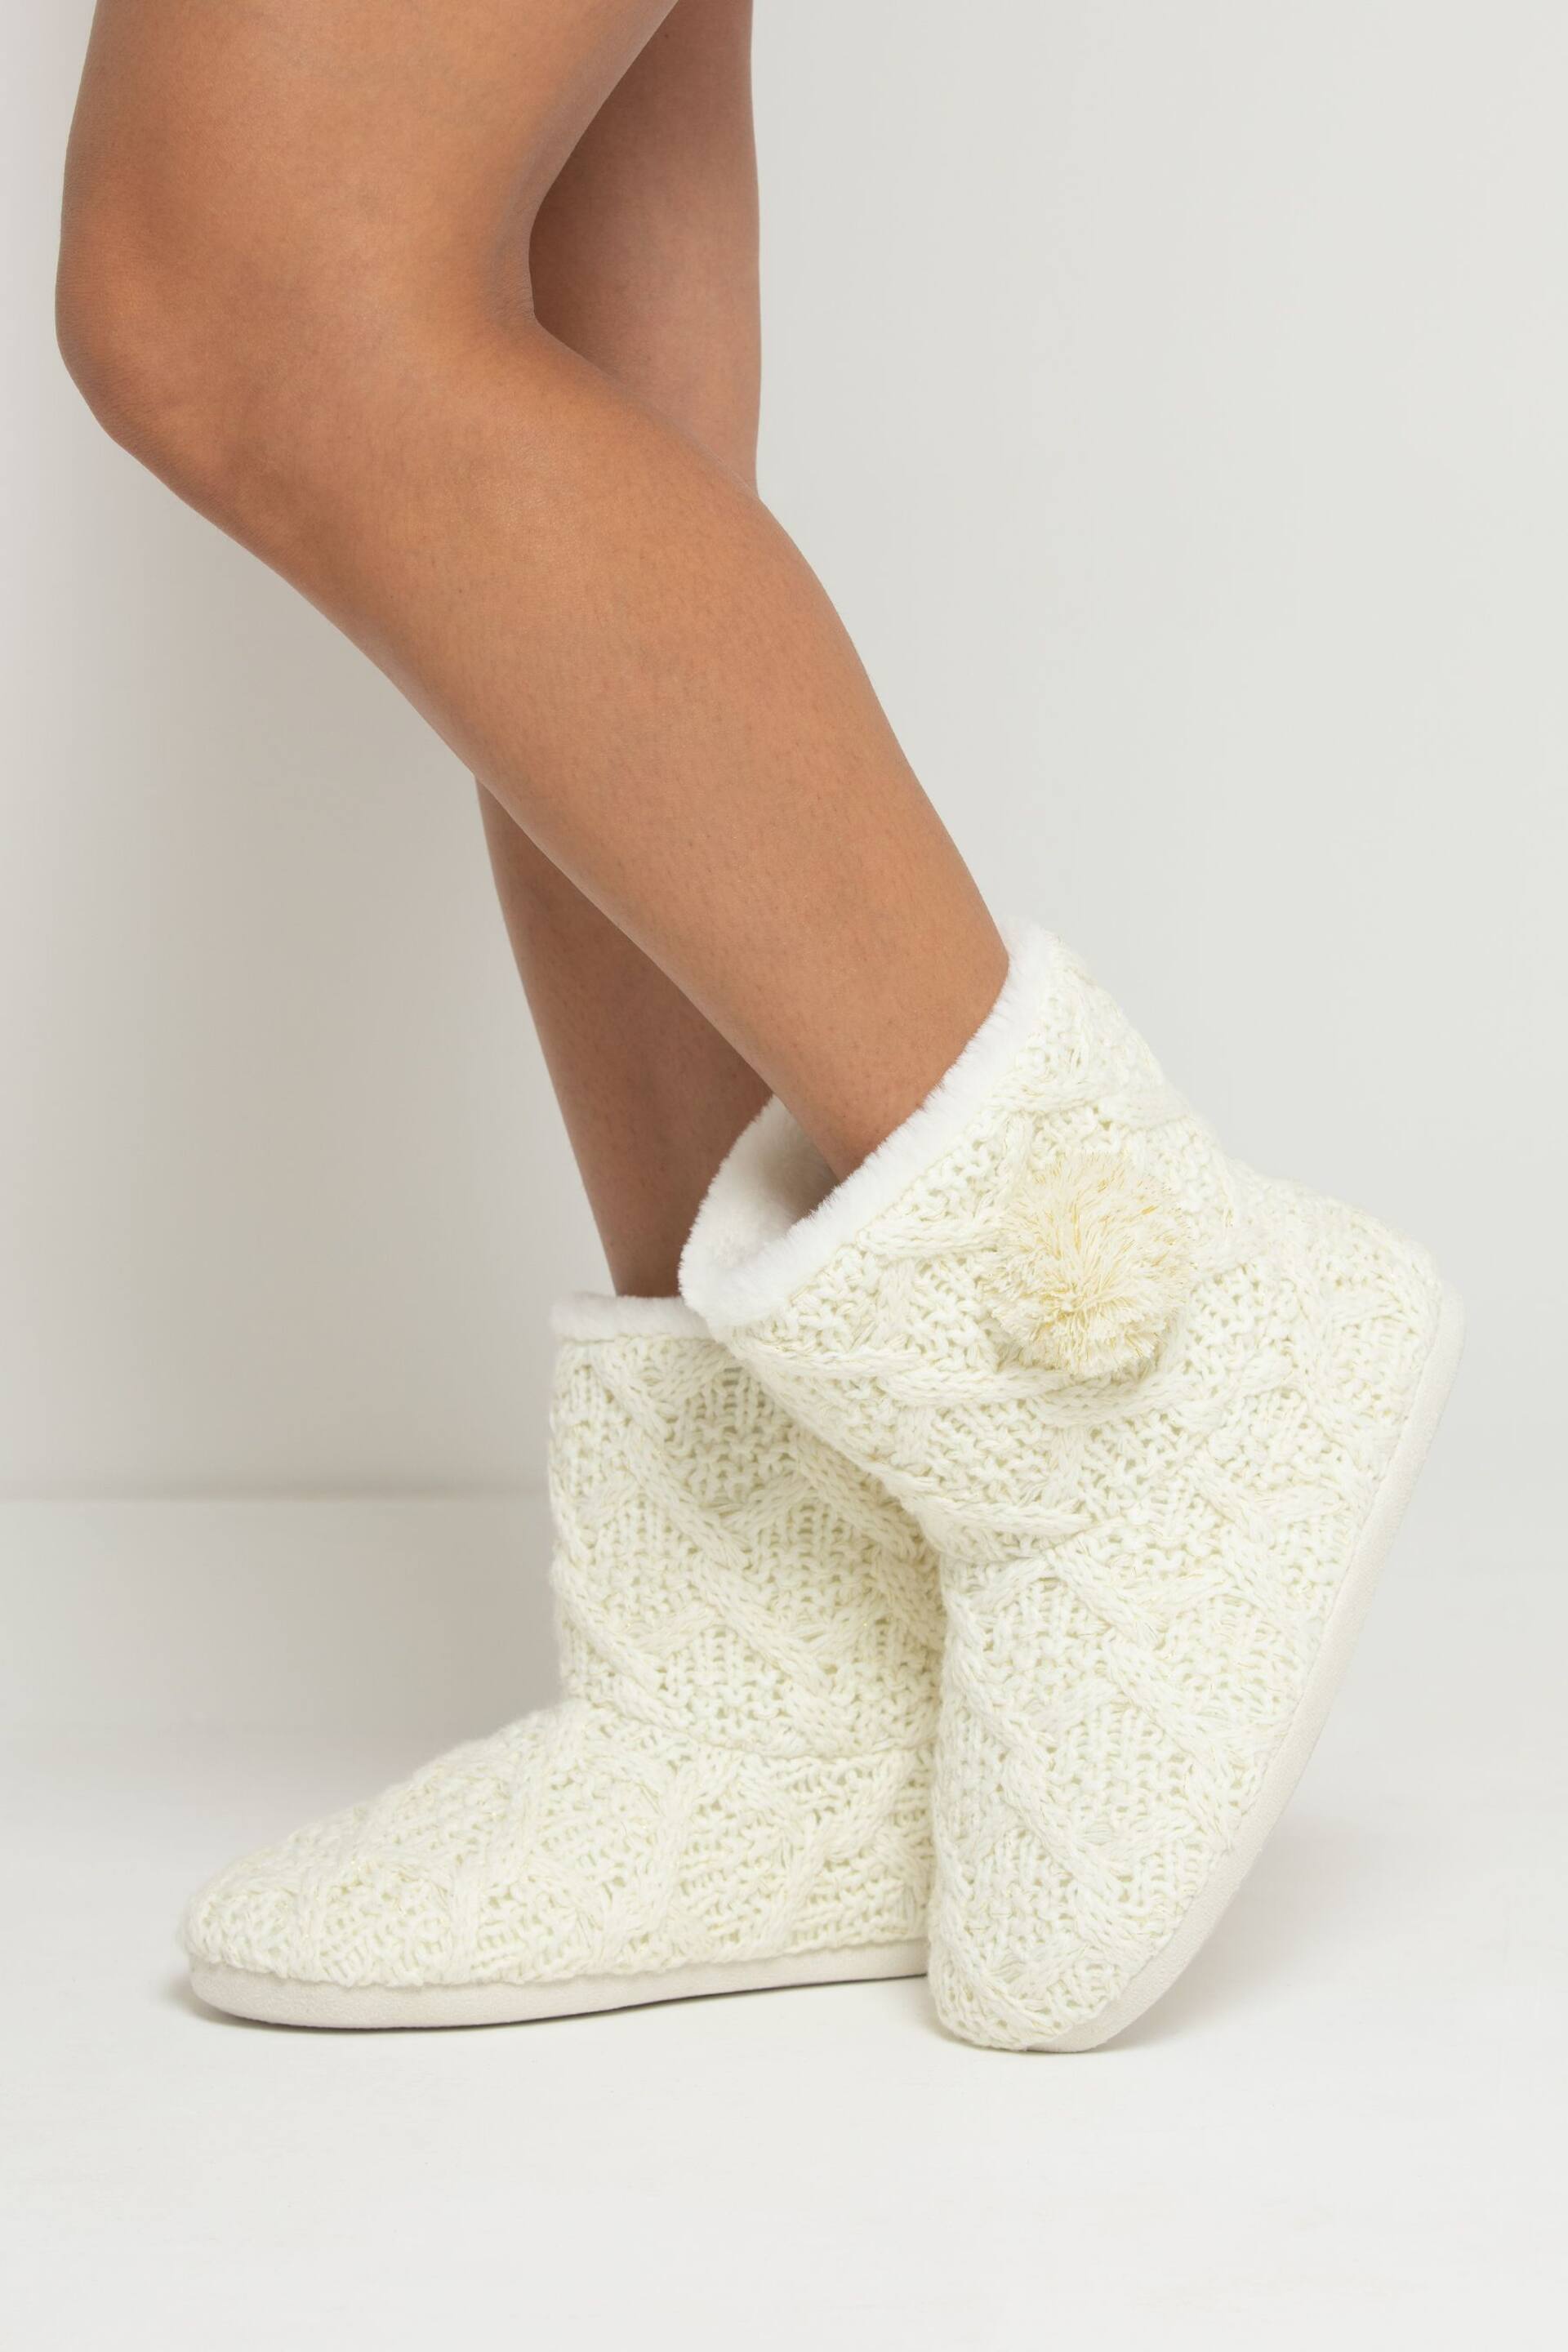 Pour Moi Cream Cable Knit Faux Fur Lined Bootie Slipper - Image 1 of 3